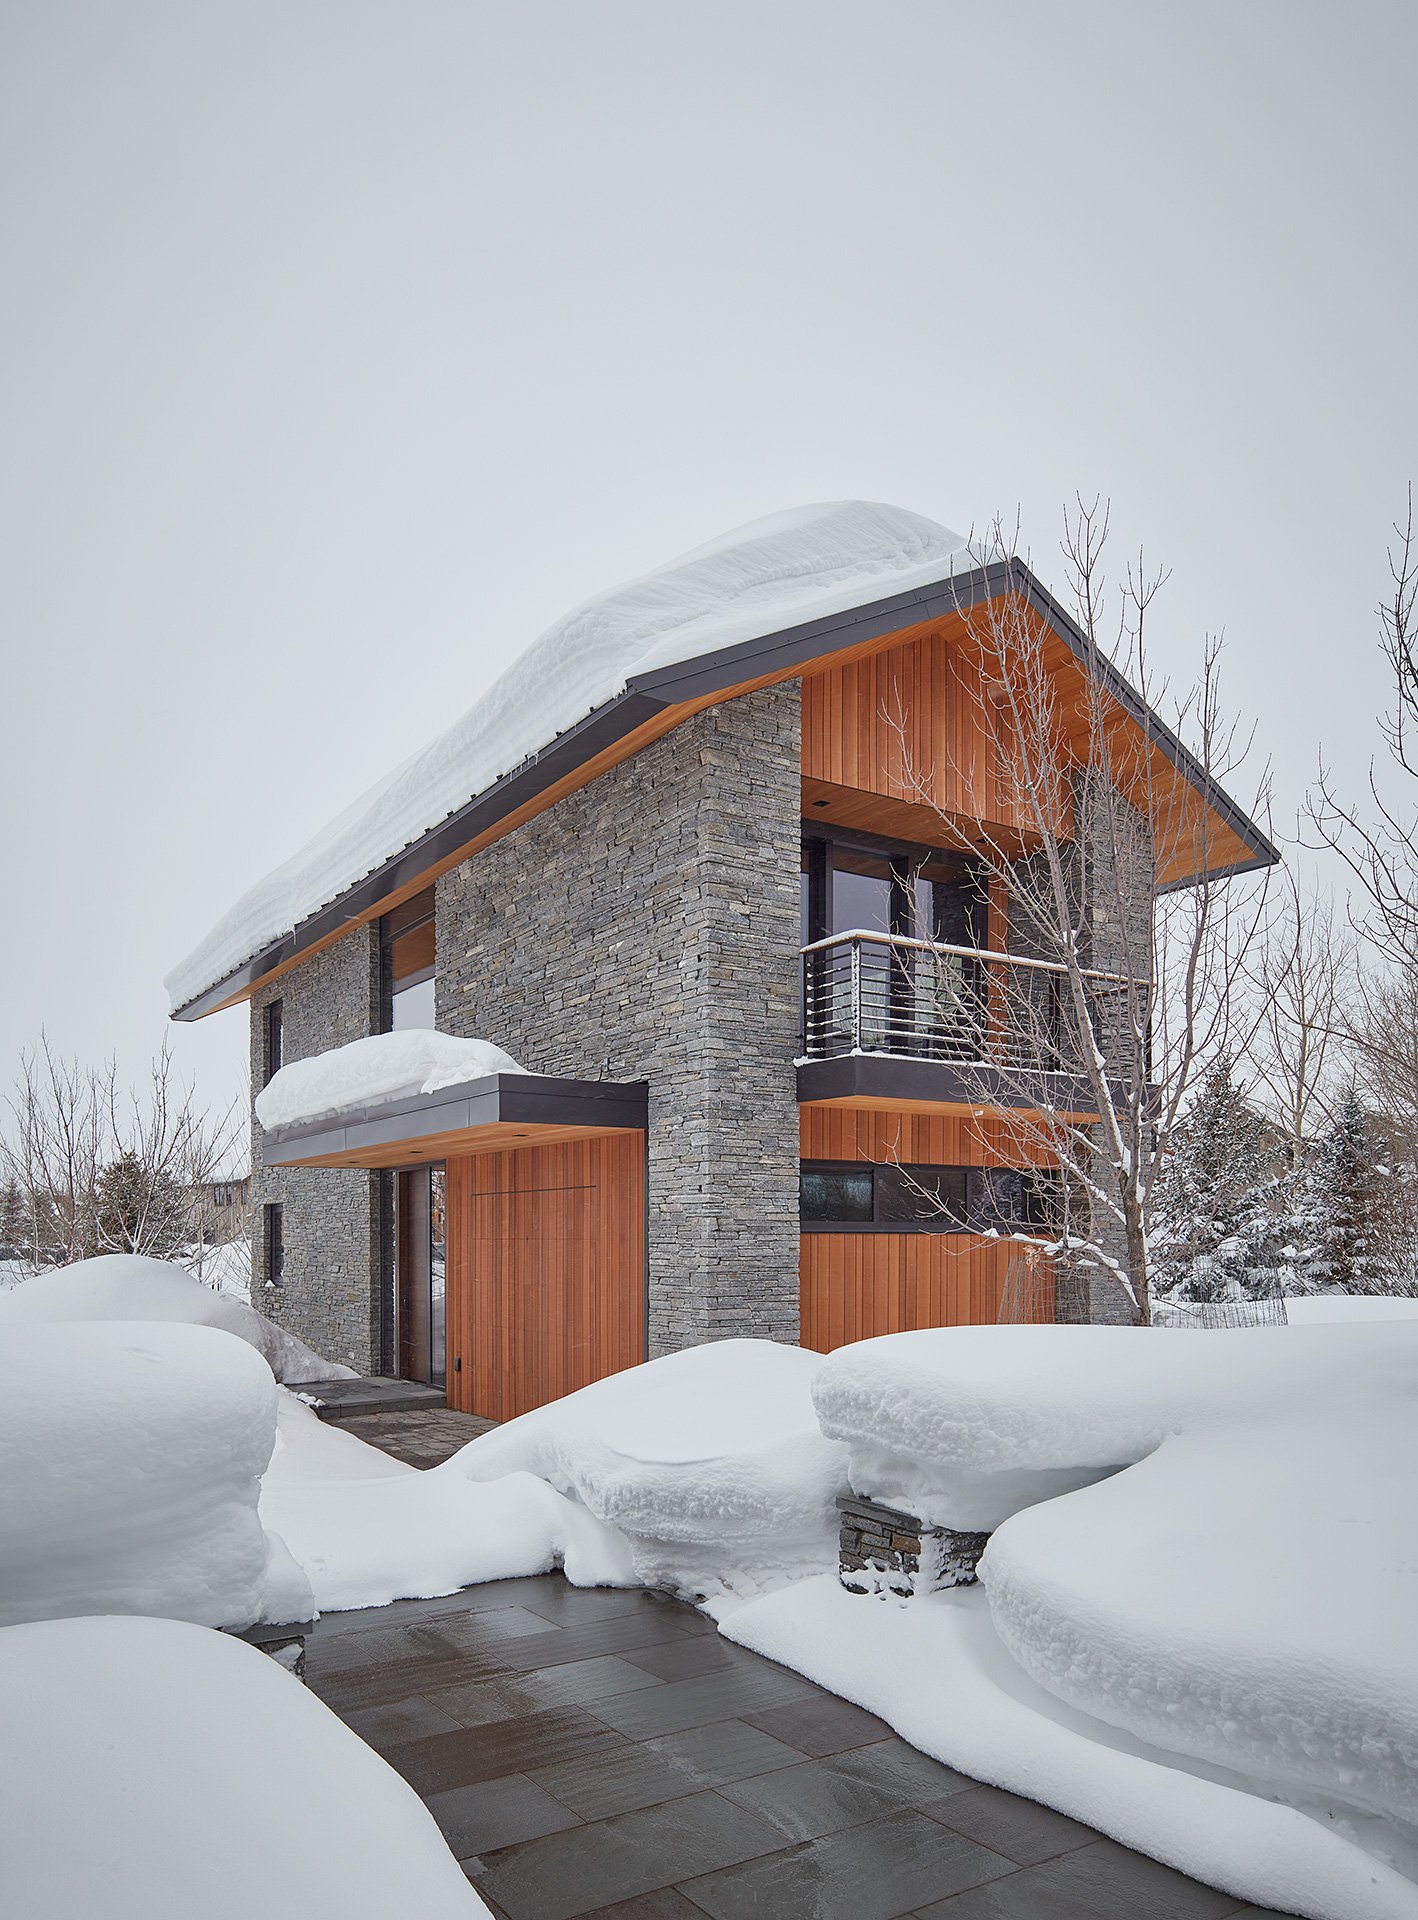 Guest house made of stone and wood covered in snow